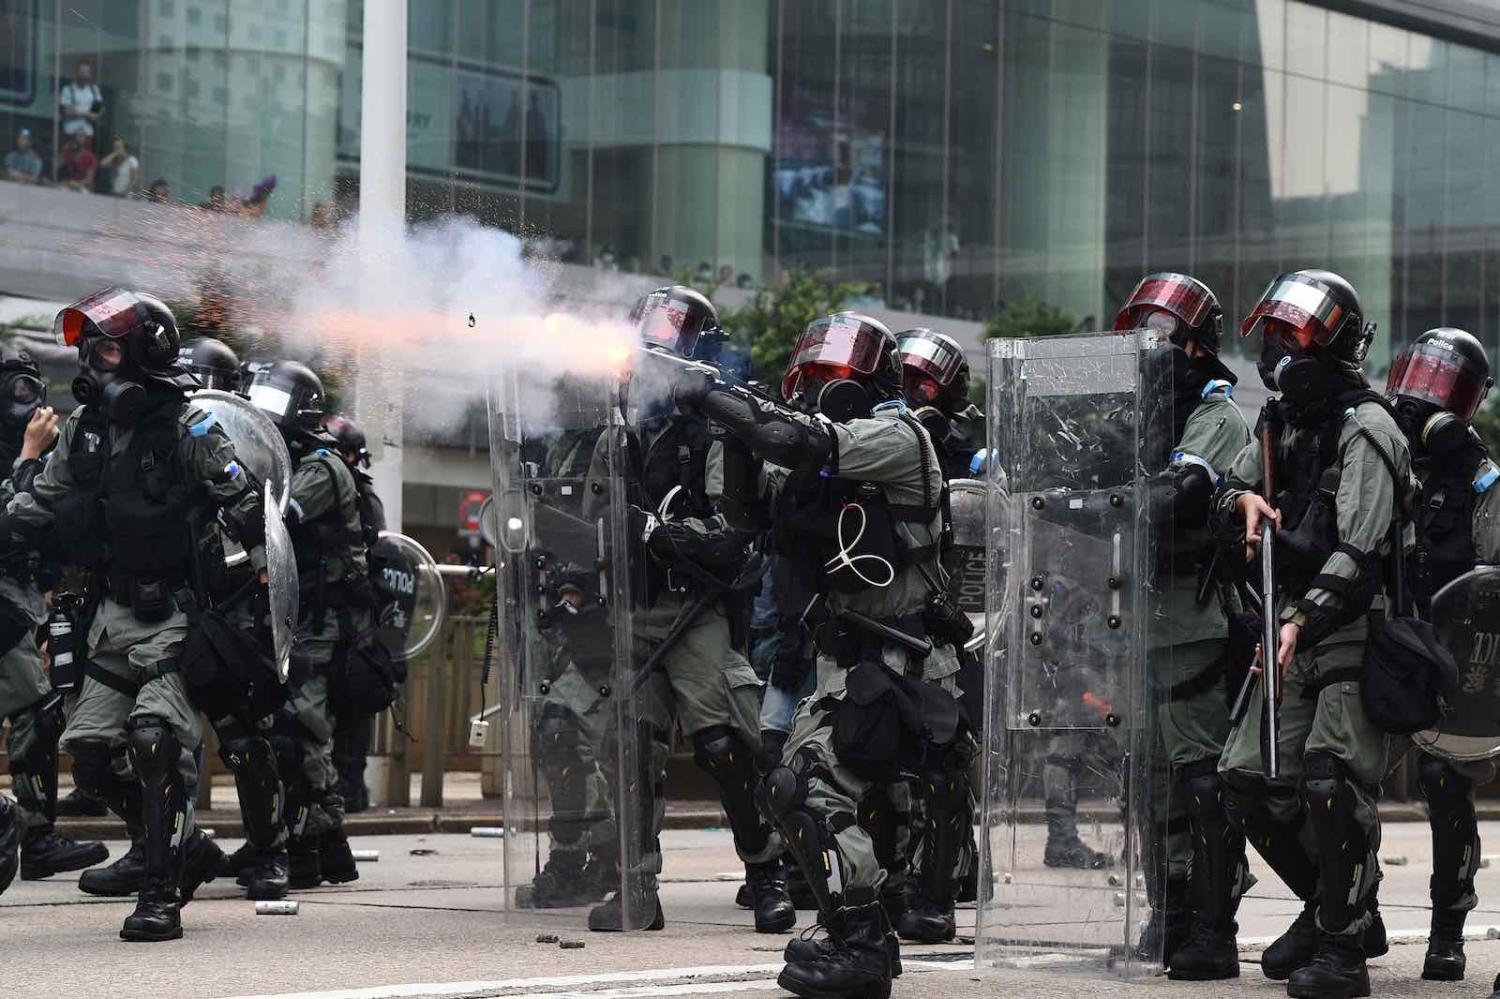 Hong Kong police fire tear gas towards marching protesters, 29 September 2019, a day of global protests ahead of communist China’s 70th birthday (Photo by Mohd Rasfan/AFP/Getty Images)